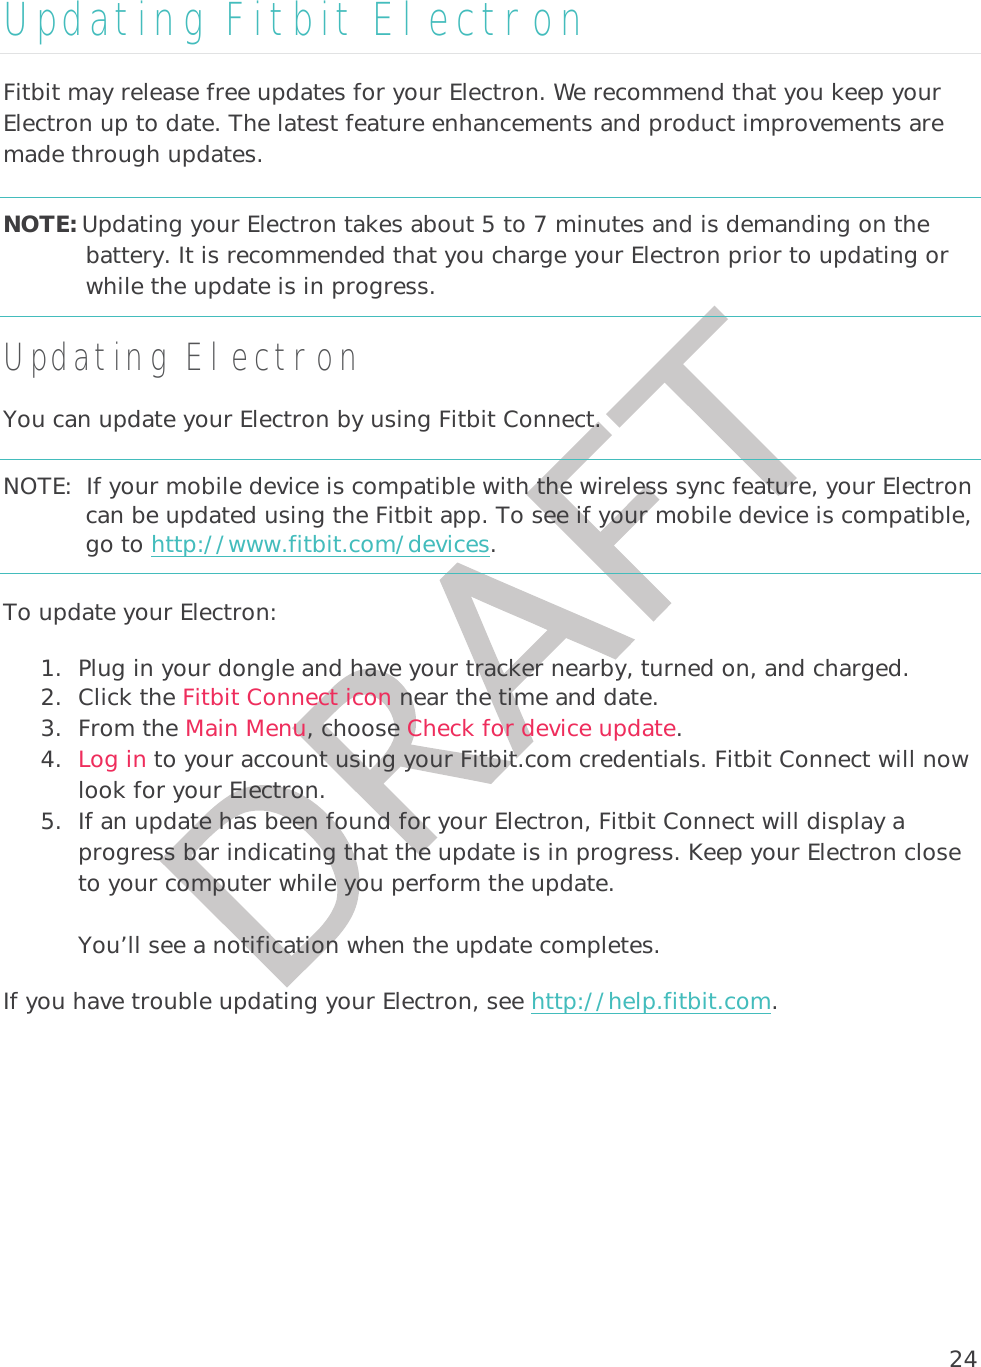 24Updating Fitbit Electron Fitbit may release free updates for your Electron. We recommend that you keep your Electron up to date. The latest feature enhancements and product improvements are made through updates. NOTE: Updating your Electron takes about 5 to 7 minutes and is demanding on the battery. It is recommended that you charge your Electron prior to updating or while the update is in progress.   Updating Electron You can update your Electron by using Fitbit Connect. NOTE:  If your mobile device is compatible with the wireless sync feature, your Electron can be updated using the Fitbit app. To see if your mobile device is compatible, go to http://www.fitbit.com/devices. To update your Electron:  1. Plug in your dongle and have your tracker nearby, turned on, and charged. 2. Click the Fitbit Connect icon near the time and date.  3. From the Main Menu, choose Check for device update. 4. Log in to your account using your Fitbit.com credentials. Fitbit Connect will now look for your Electron. 5. If an update has been found for your Electron, Fitbit Connect will display a progress bar indicating that the update is in progress. Keep your Electron close to your computer while you perform the update.   You’ll see a notification when the update completes.  If you have trouble updating your Electron, see http://help.fitbit.com. 